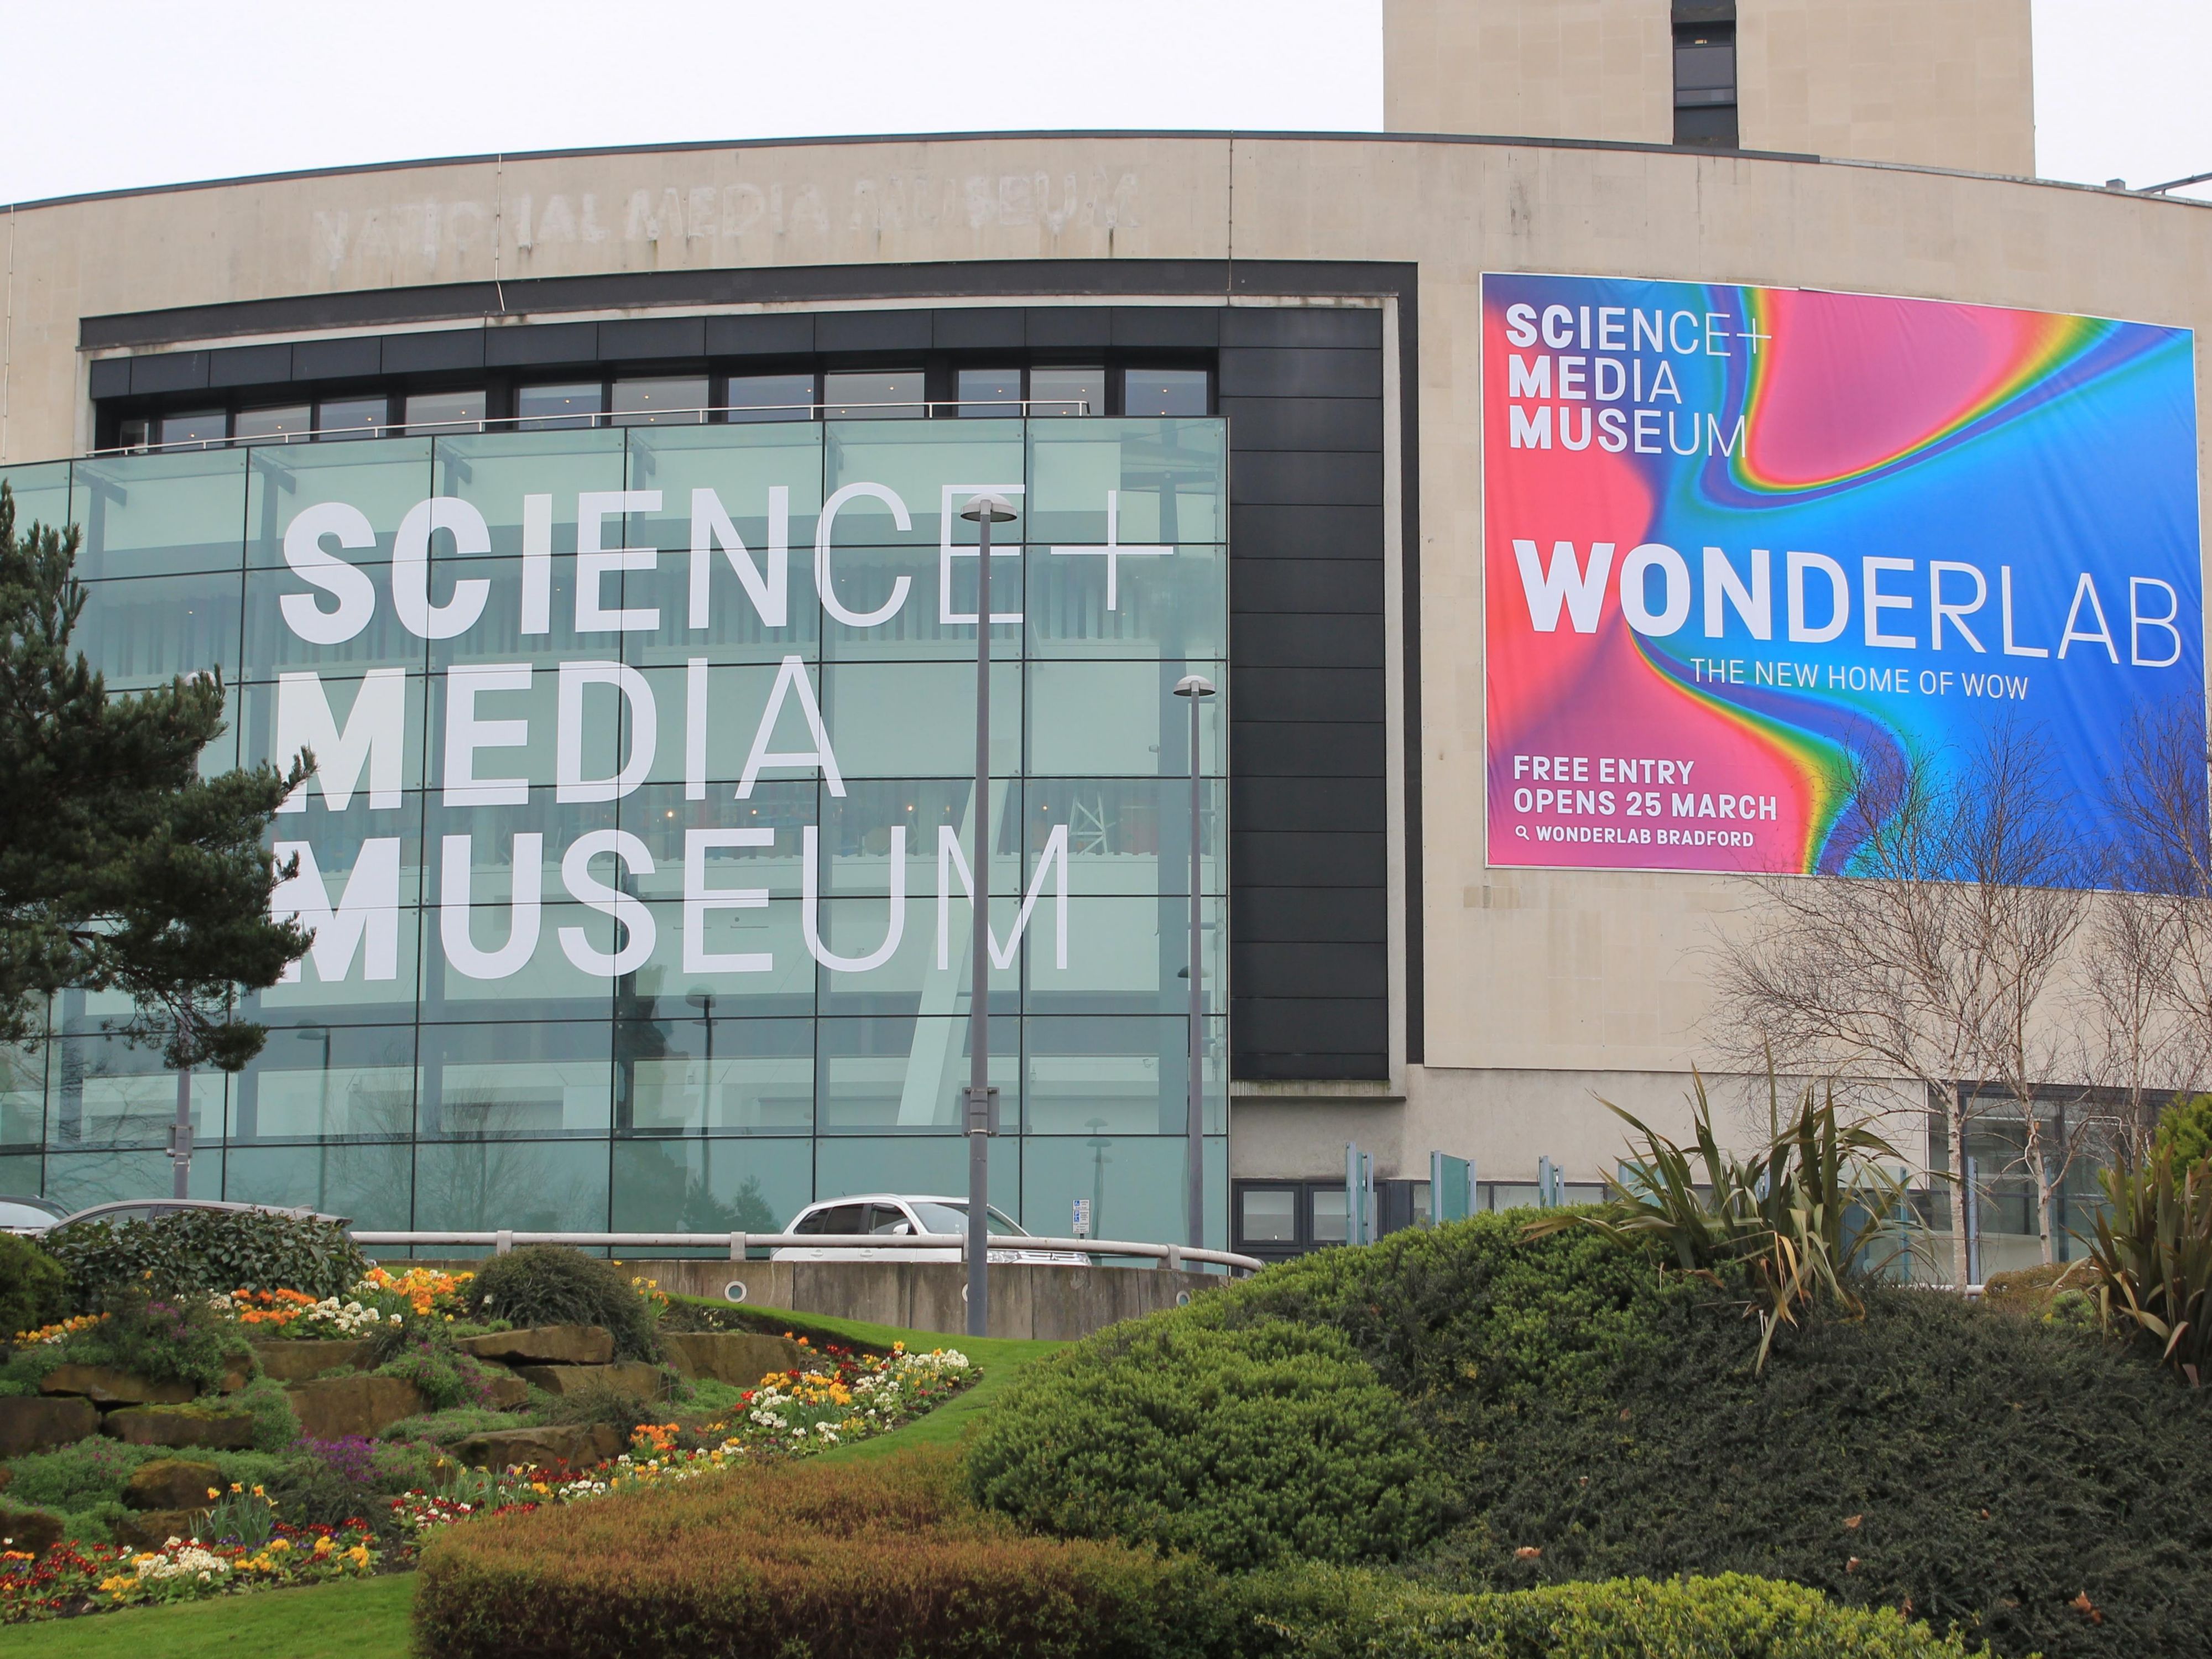 Bradford's National Science and Media Museum is a short walk away